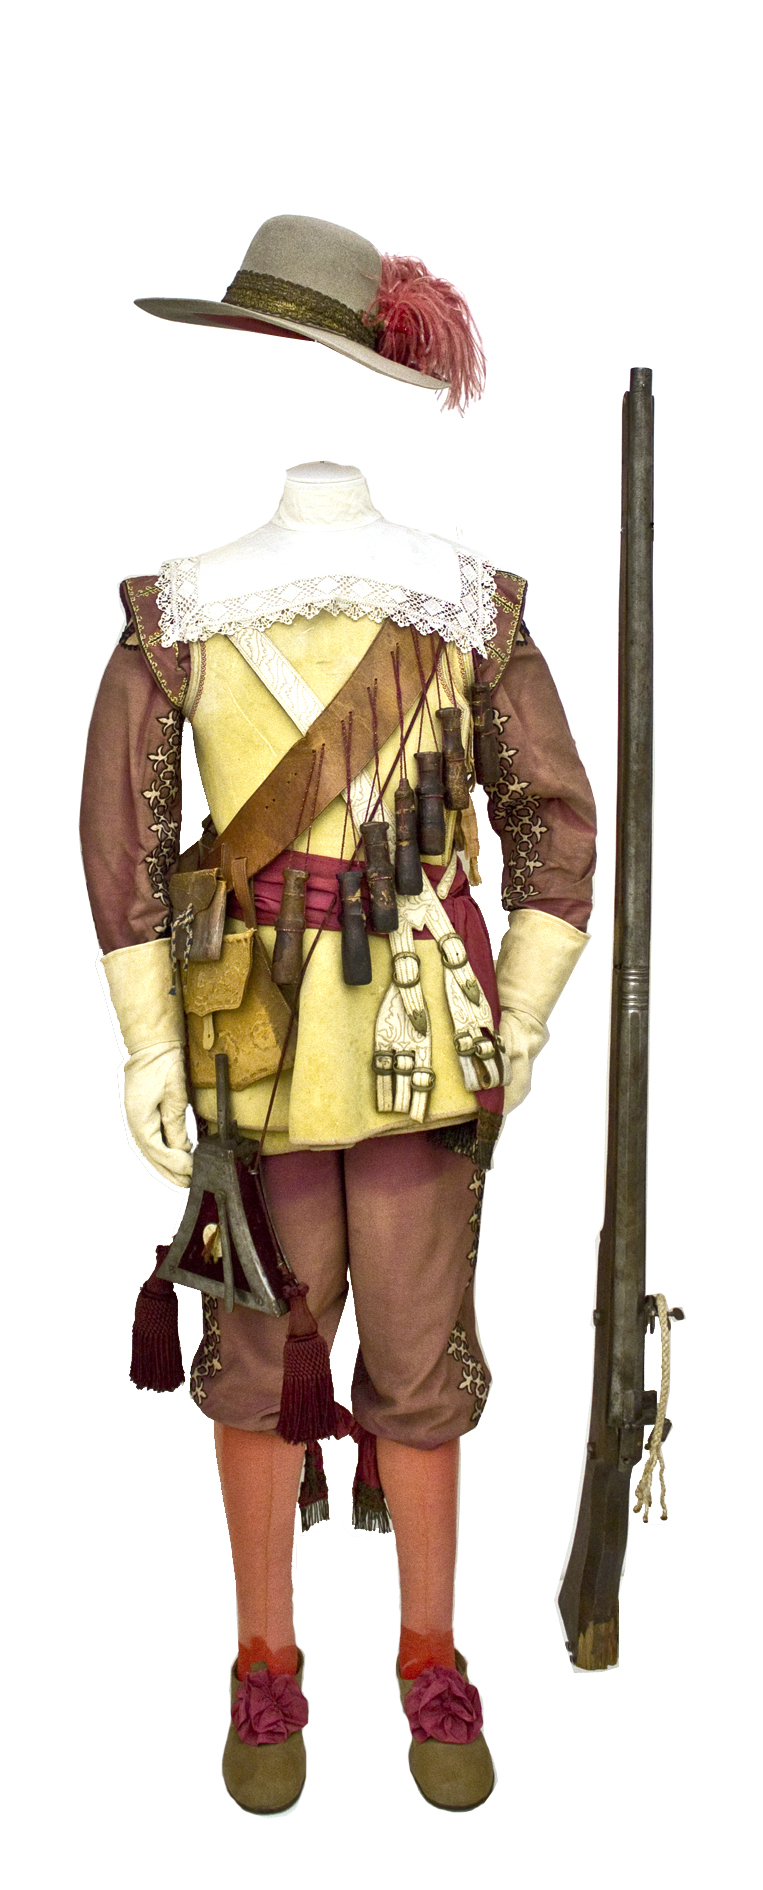 Uniform of a musketeer of the Regiment 17th century